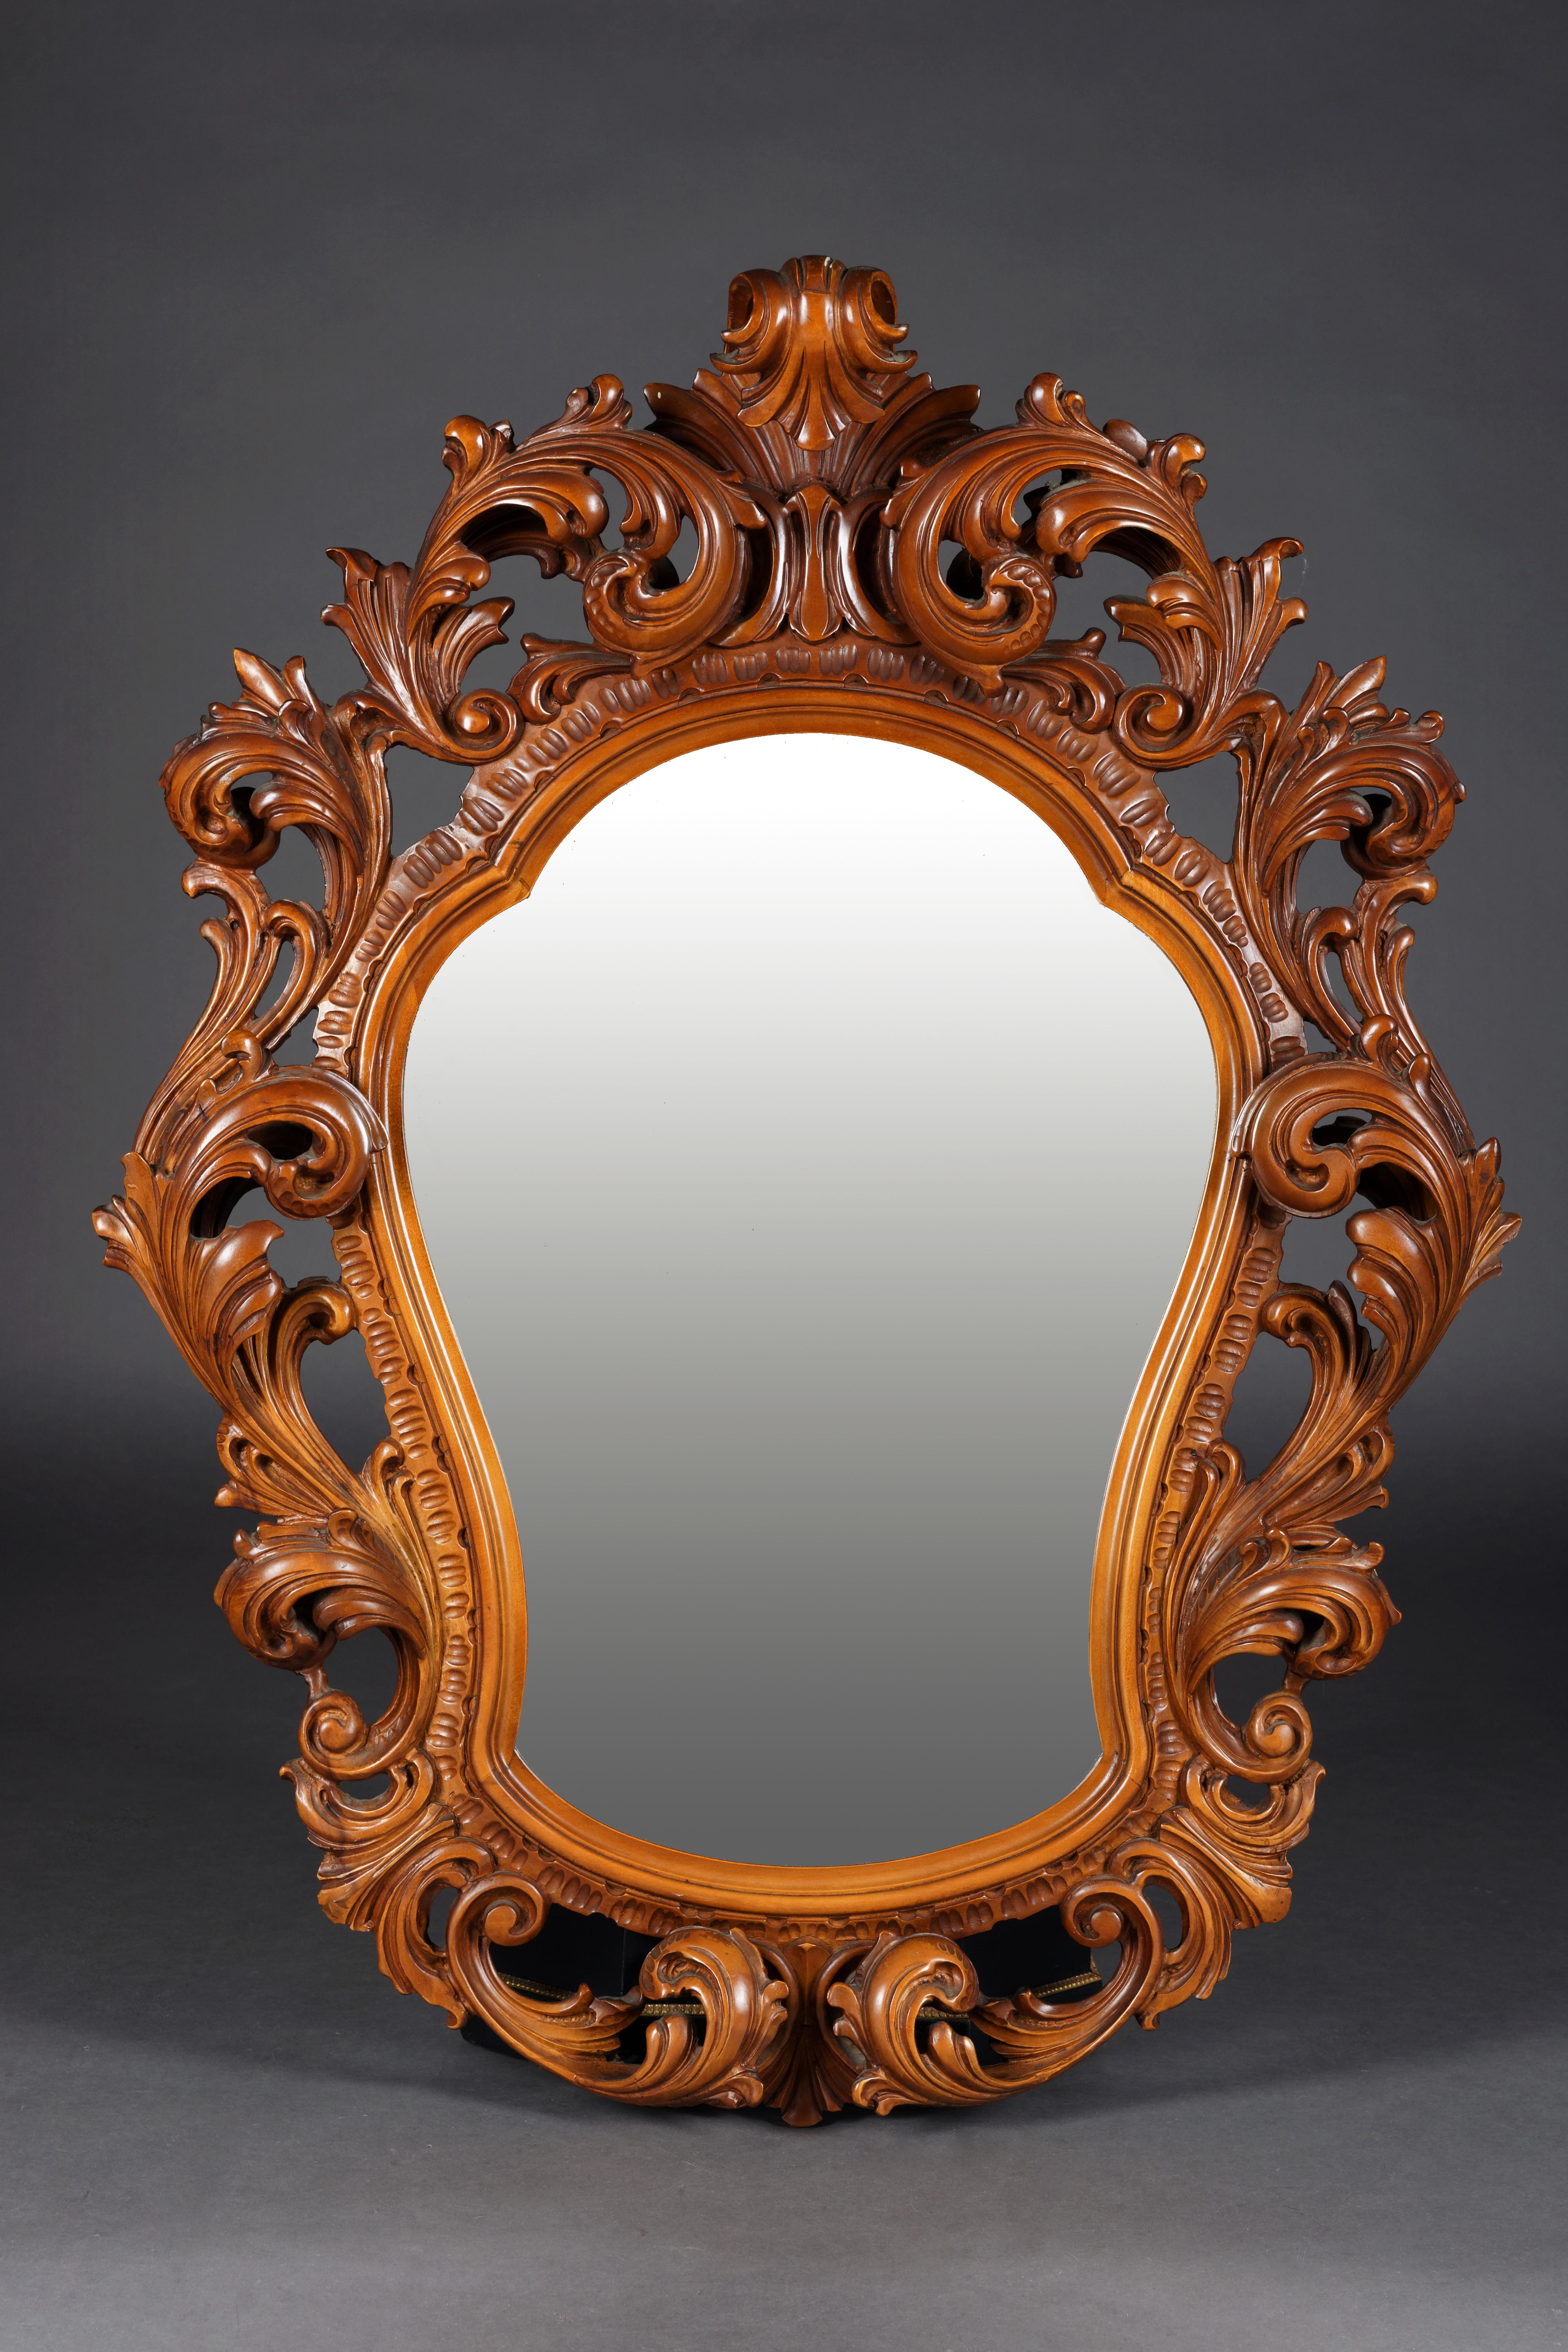 Monumental mirror in Rococo style
Walnut, finely carved. Highly shaped mirror-shaped mirror frame. Rich acanthus and rock carvings. Rich openwork rocaille carvings.

(M-13).
 